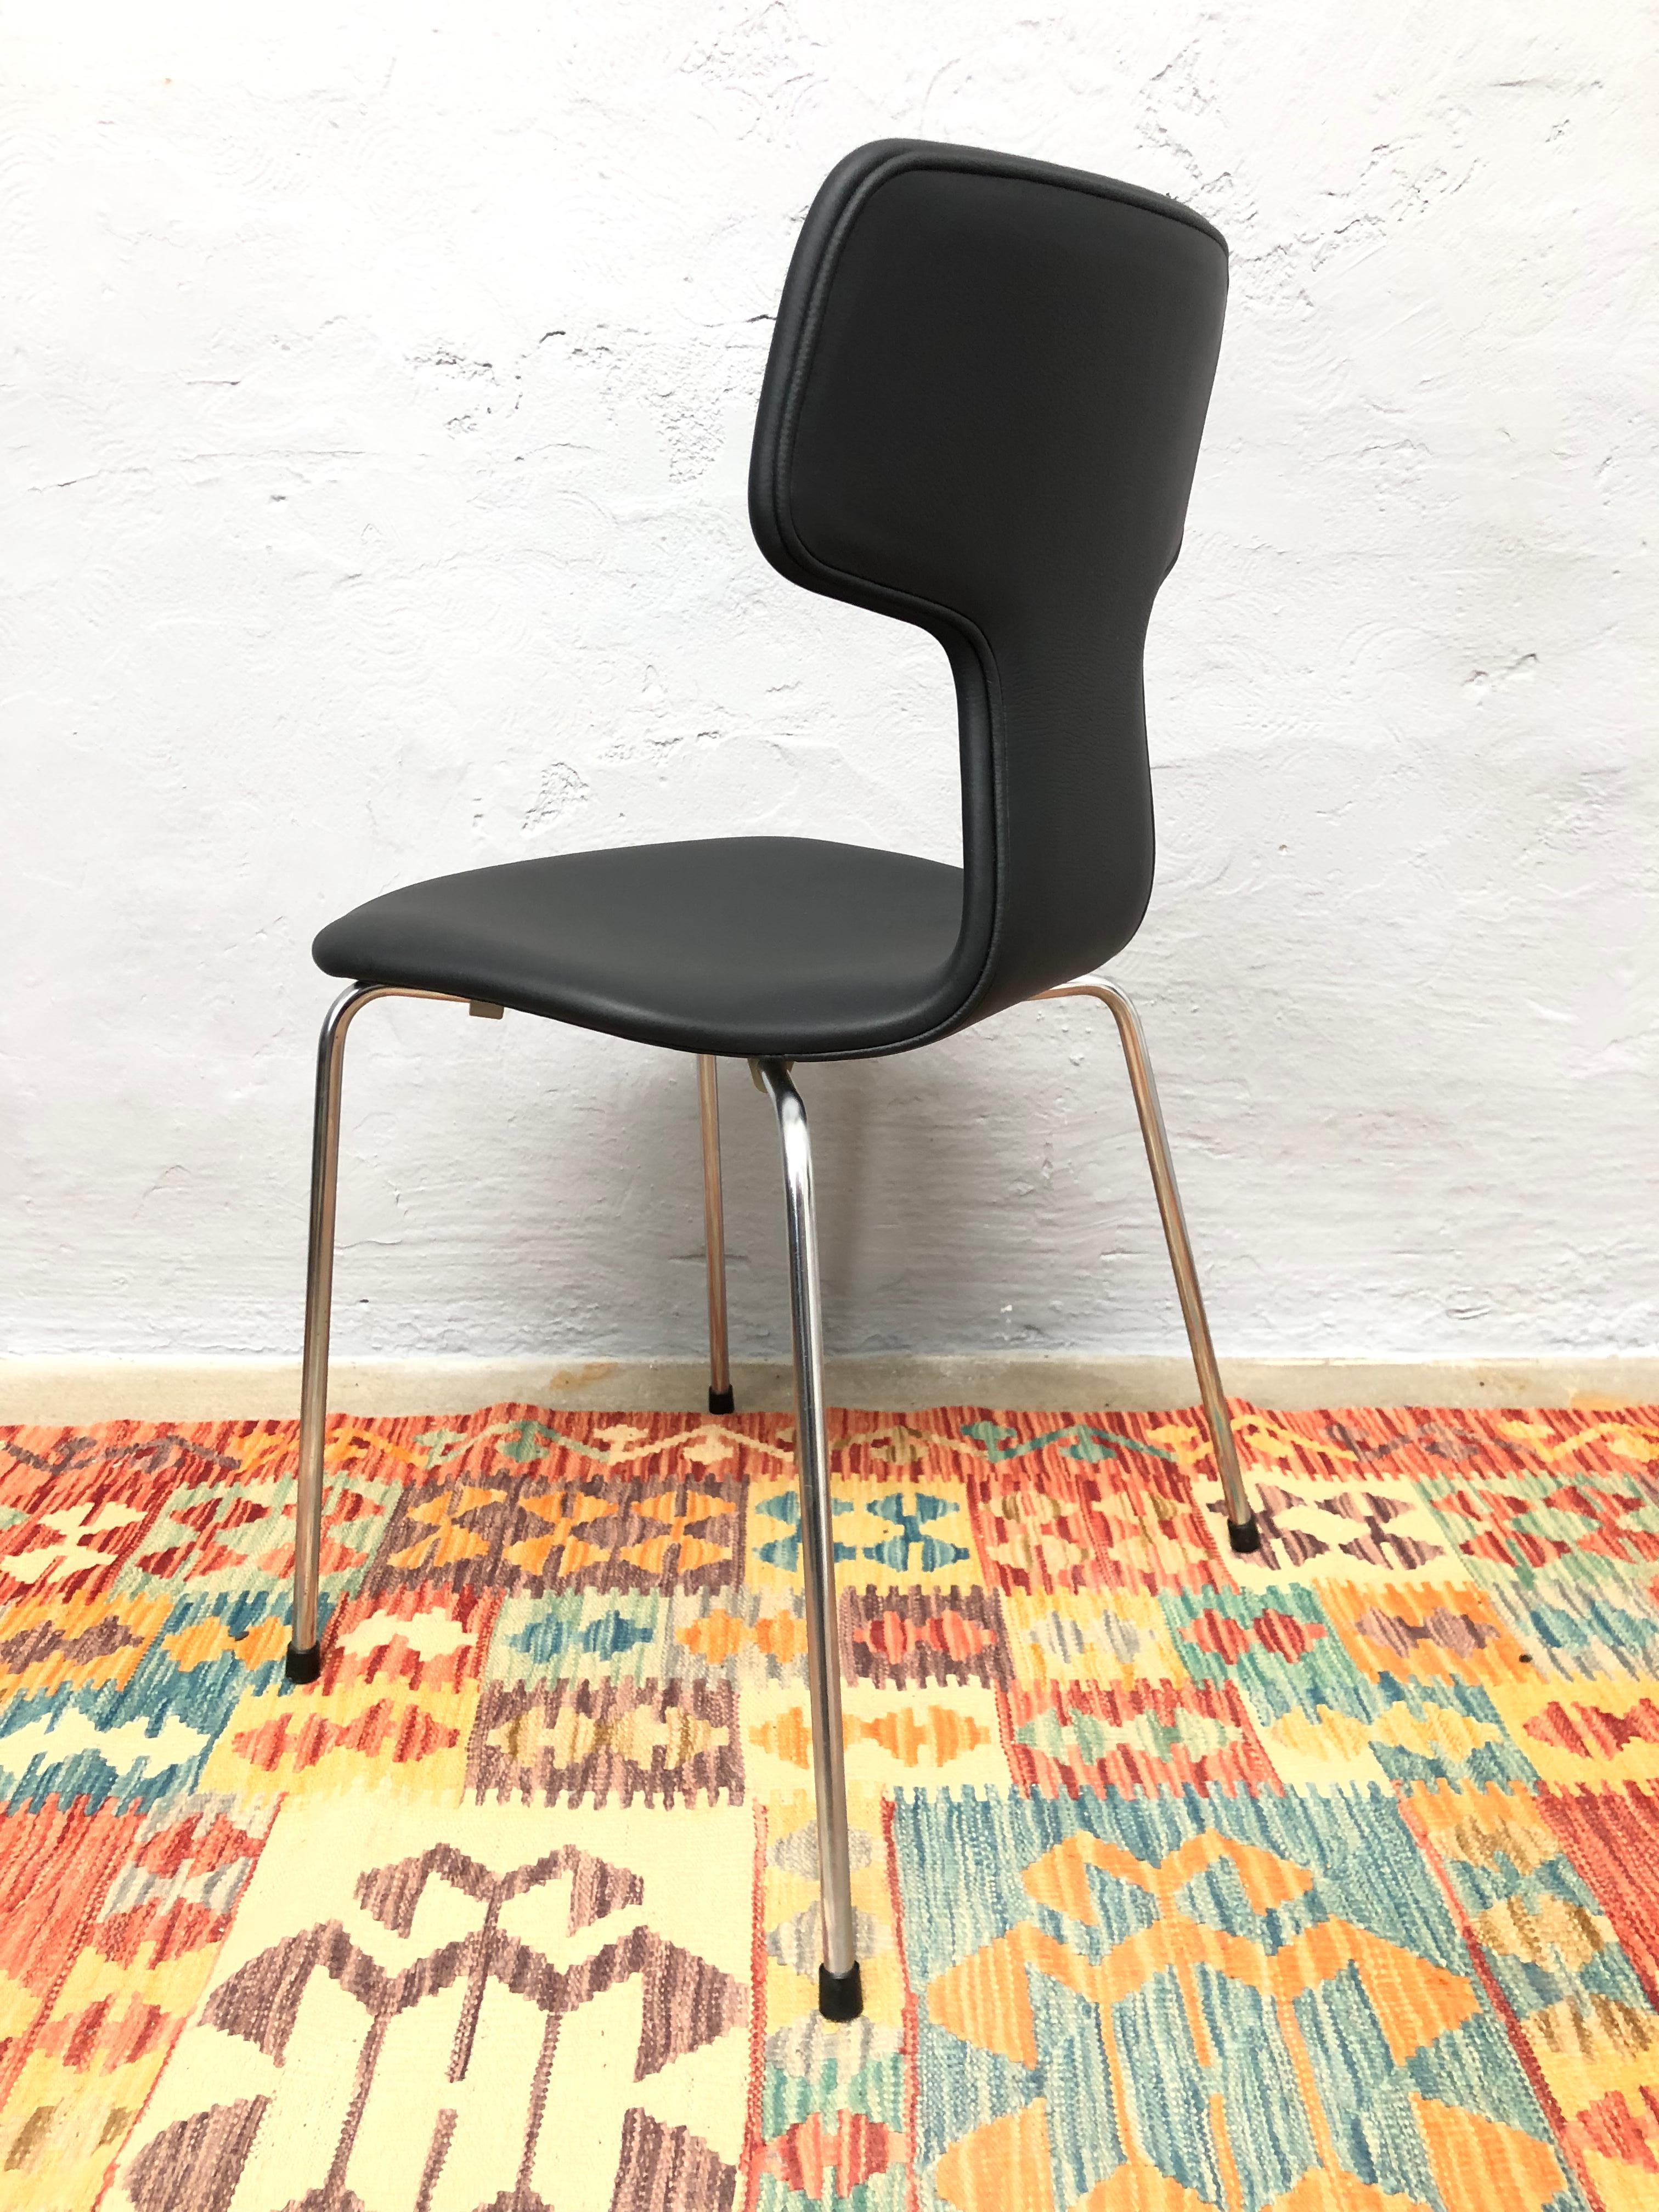 Hand-Crafted Vintage Set of 6 Iconic Arne Jacobsen 3103 Hammer Chairs Designed in 1955